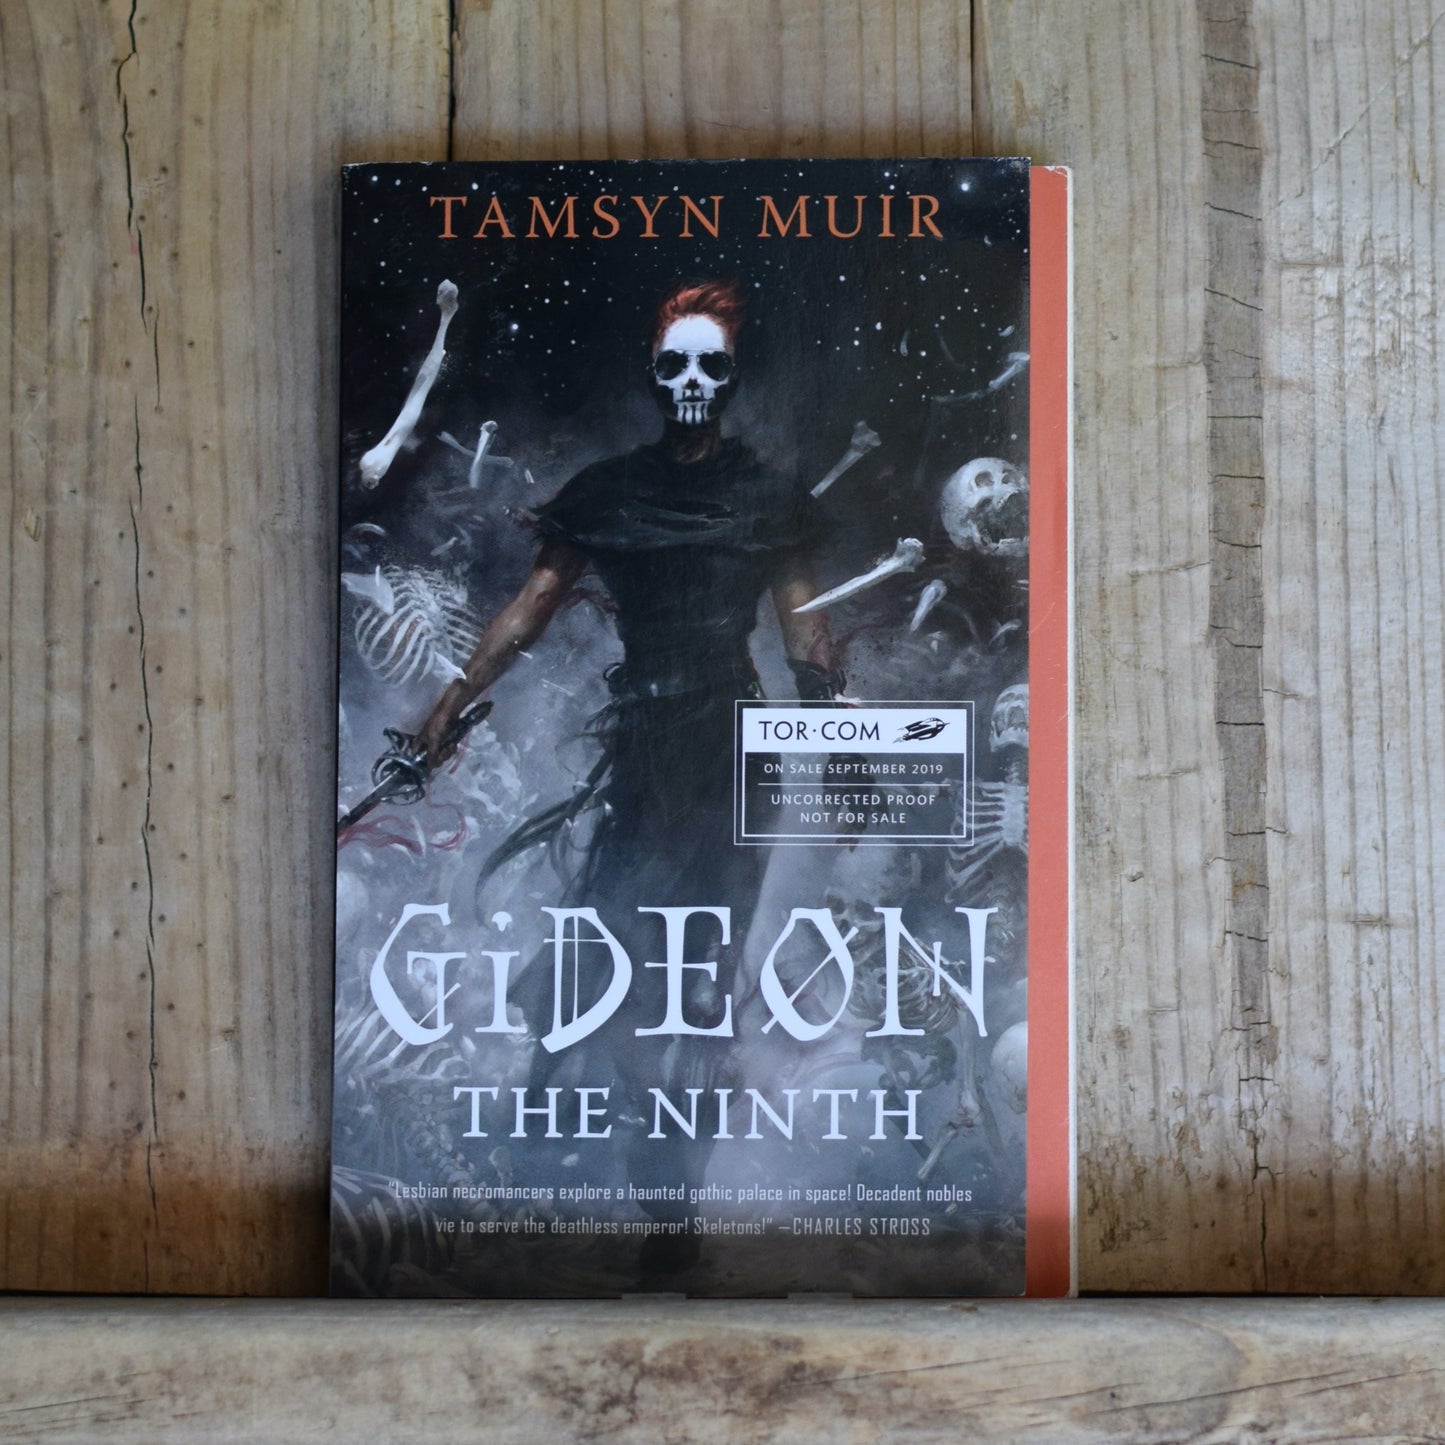 Fantasy Paperback: Tamsyn Muir - Gideon The Ninth FIRST EDITION UNCORRECTED PROOF